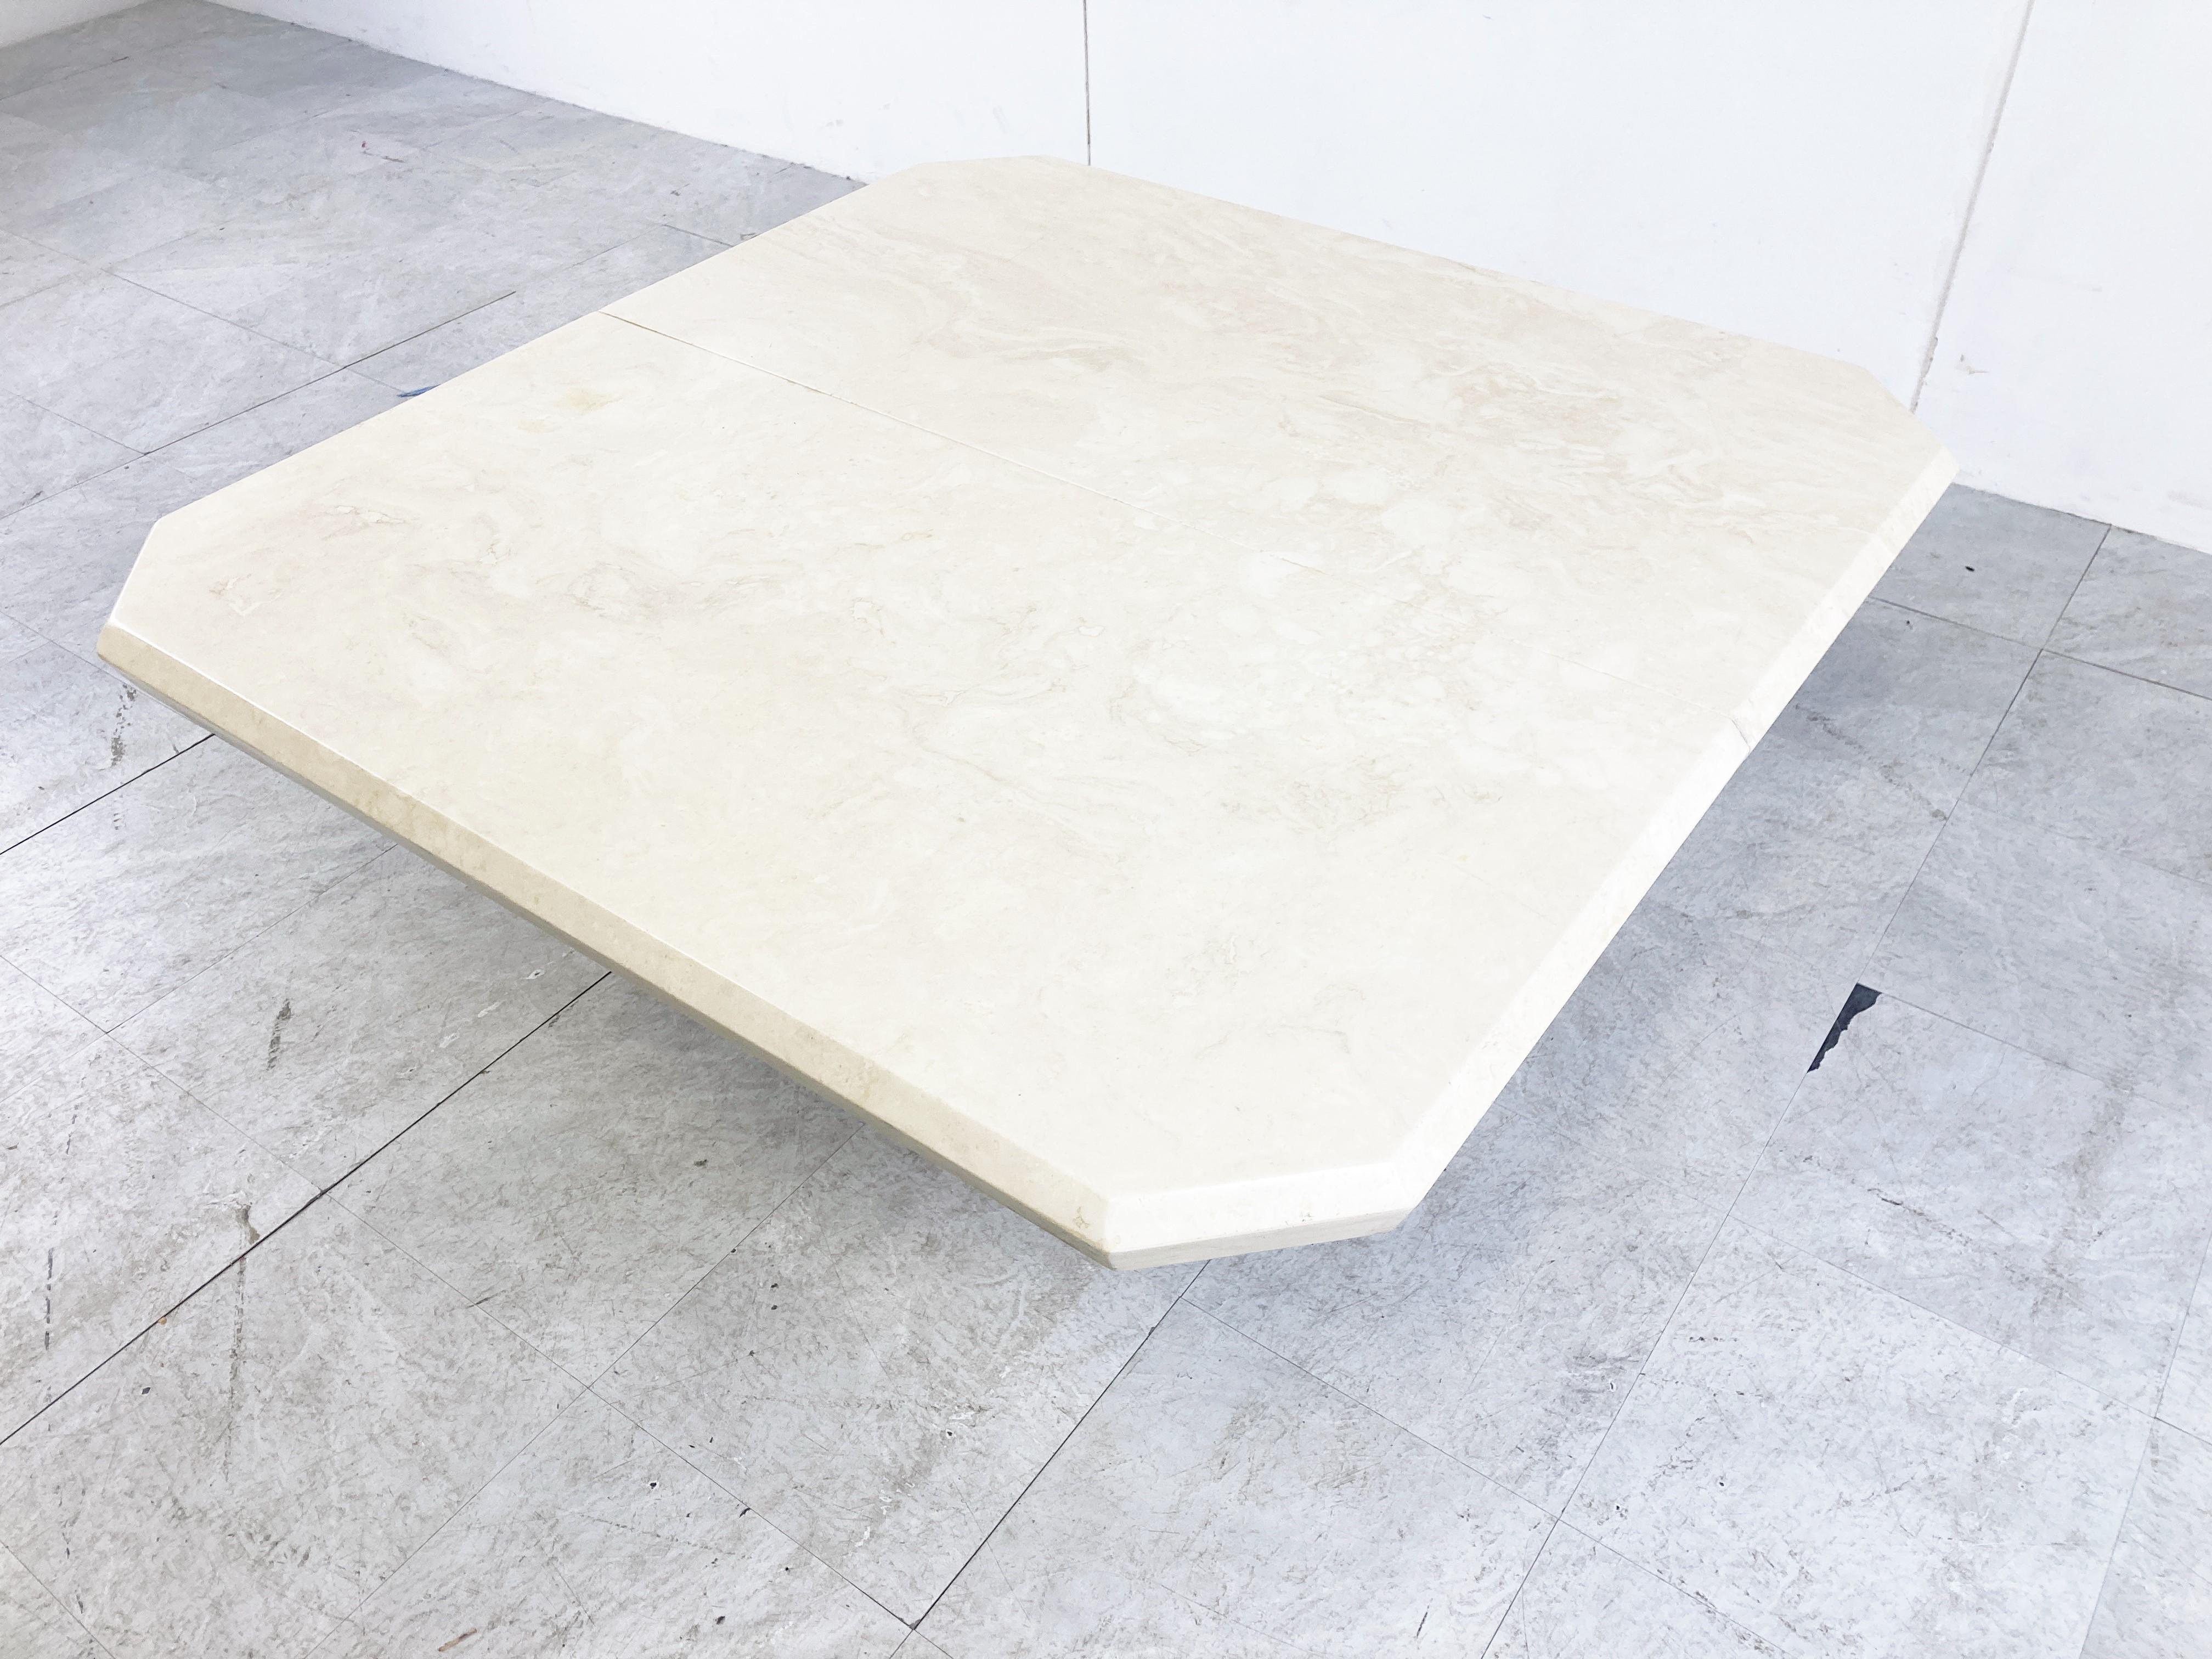 Vintage travertine hidden bar coffee table.

The two table tops slide open to reveal a storage space.

Elegant shaped base and top.

Beautiful natural coloured travertine.

Good condition.

1970s - Italy

Dimensions:
Height: